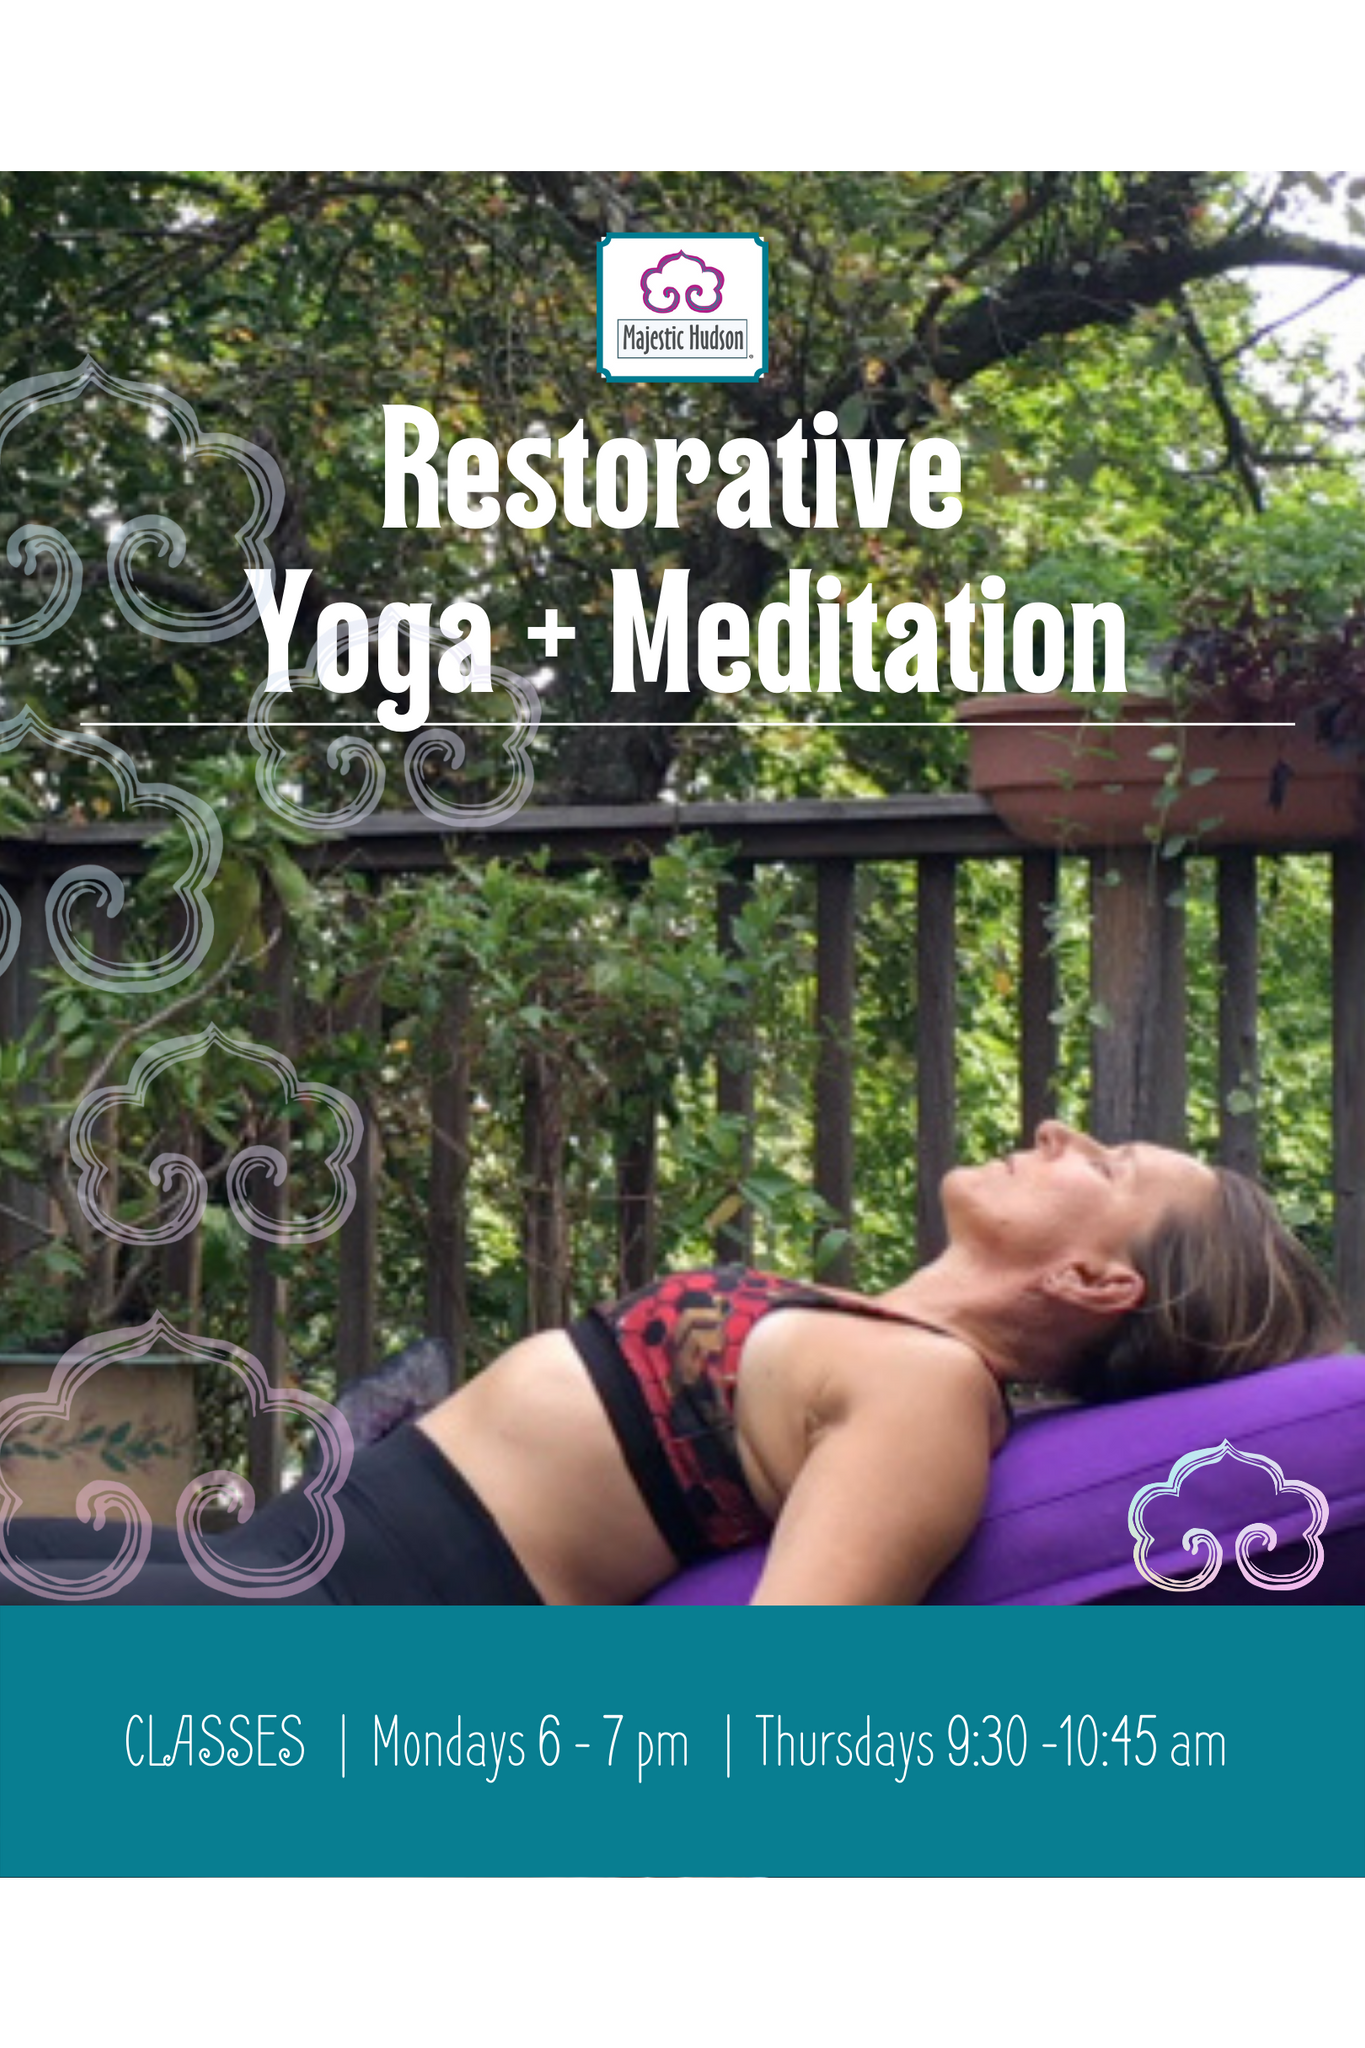 Restorative Yoga and Meditation - Fall Schedule! Majestic Hudson Lifestyle Experiences